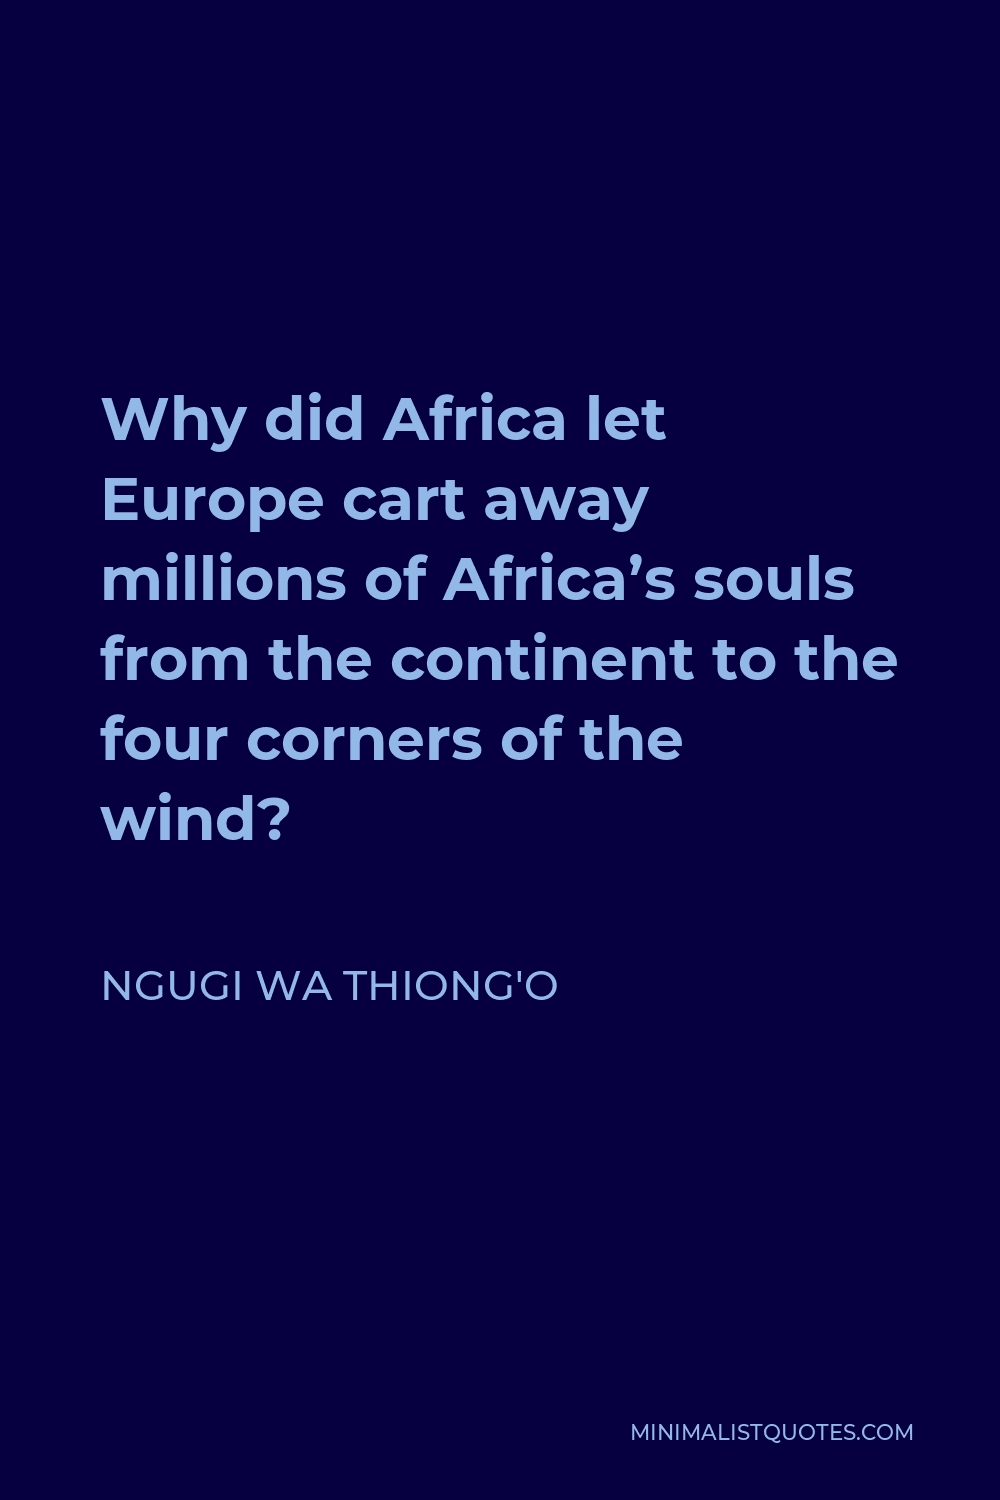 Ngugi wa Thiong'o Quote - Why did Africa let Europe cart away millions of Africa’s souls from the continent to the four corners of the wind?